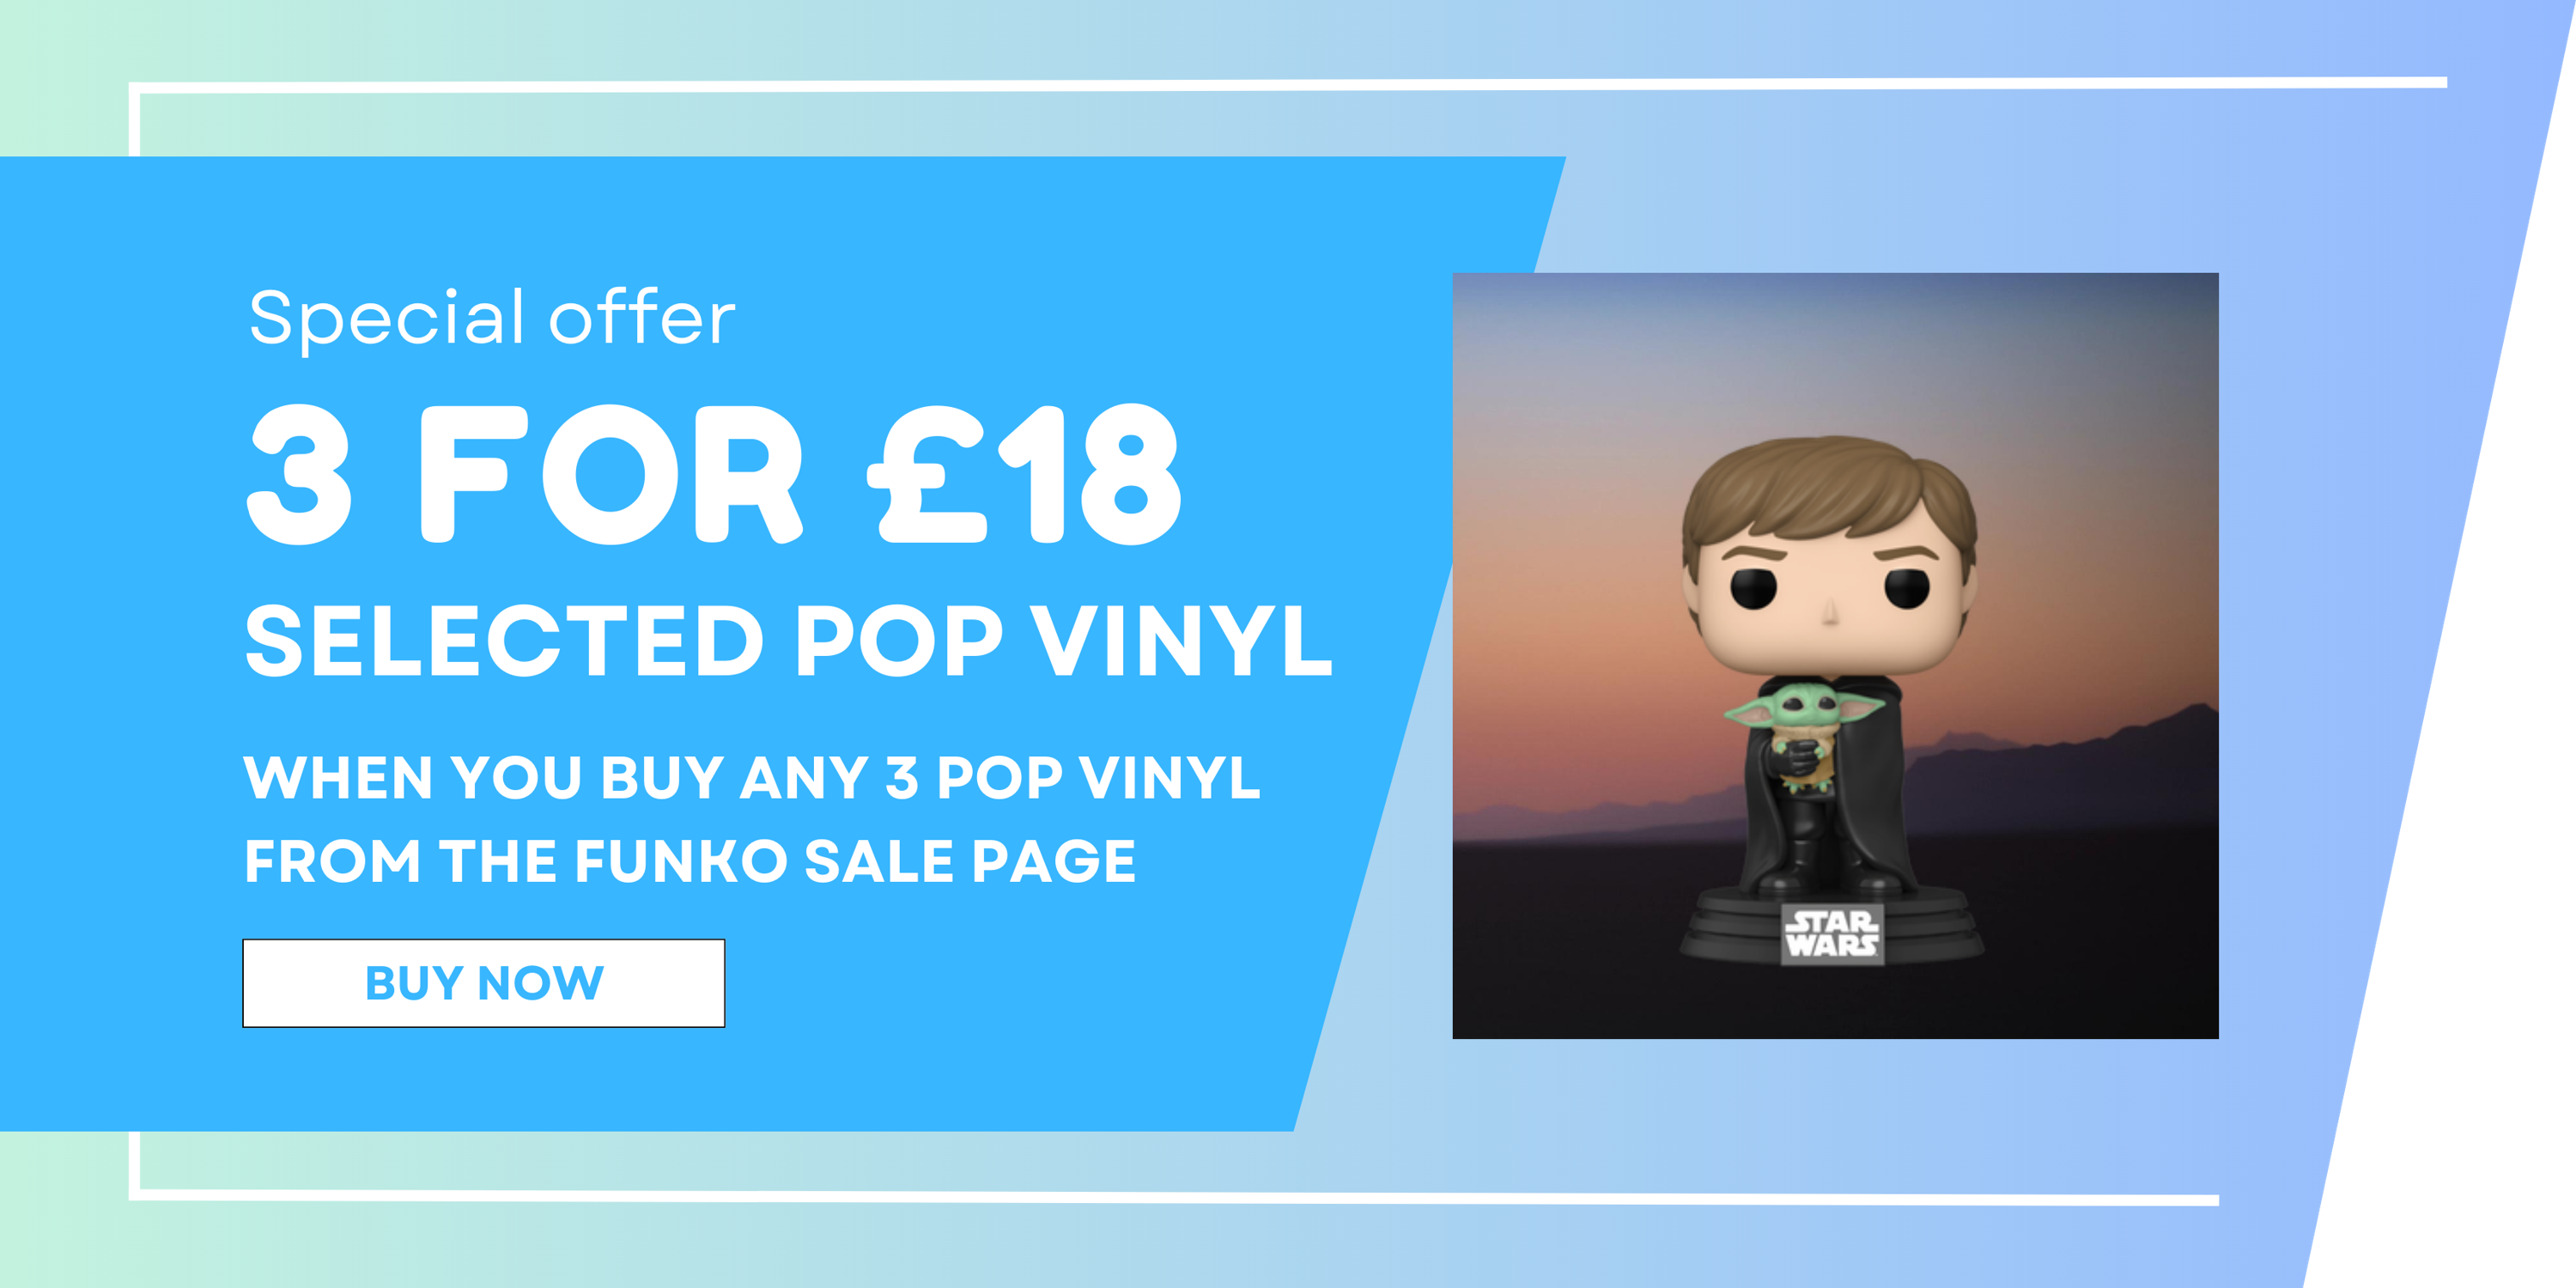 3 for £18 on Selected Pop Vinyl